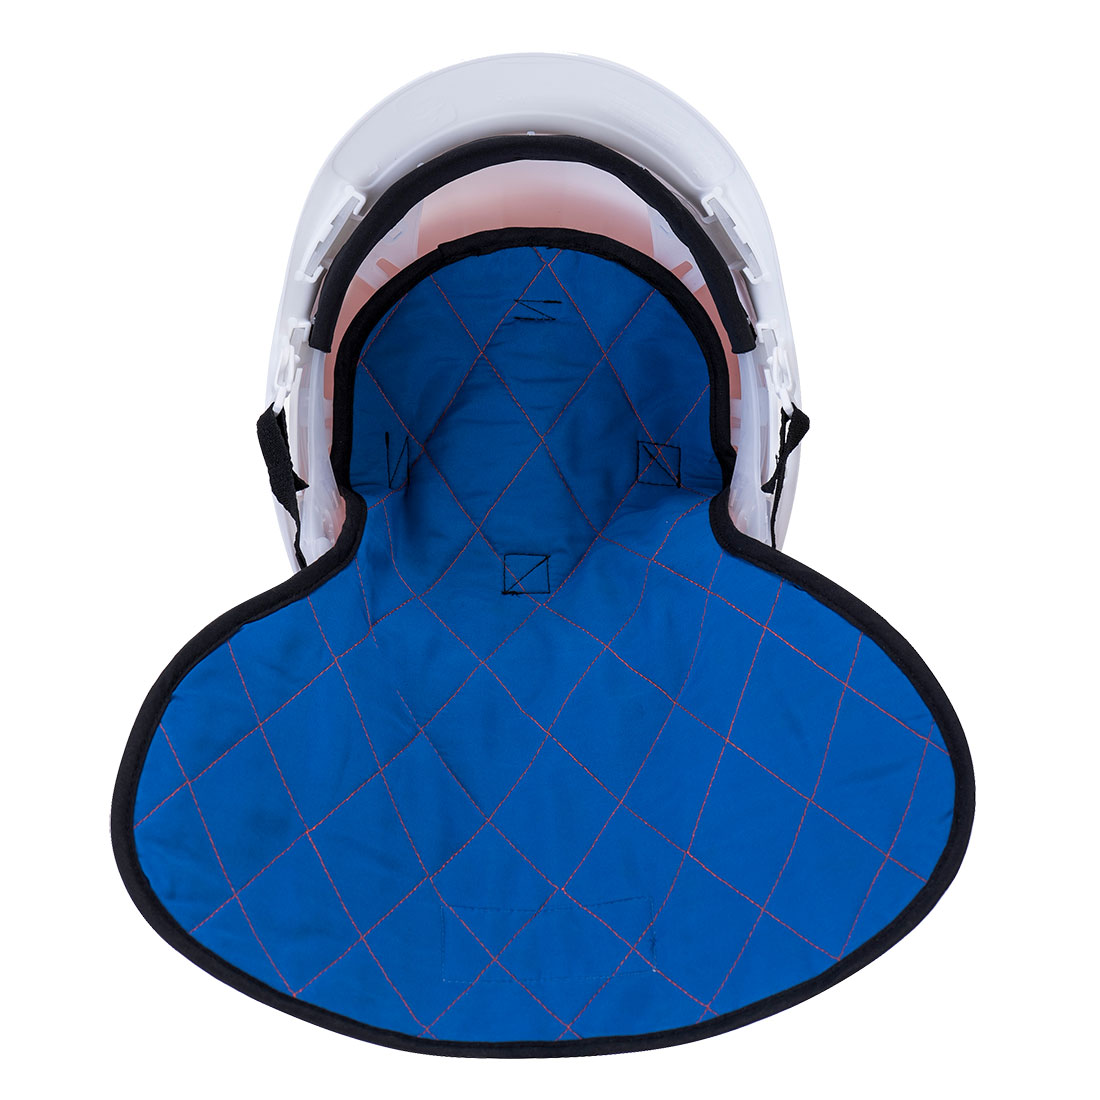 Portwest CV03 - Cooling Crown with Neck Shade